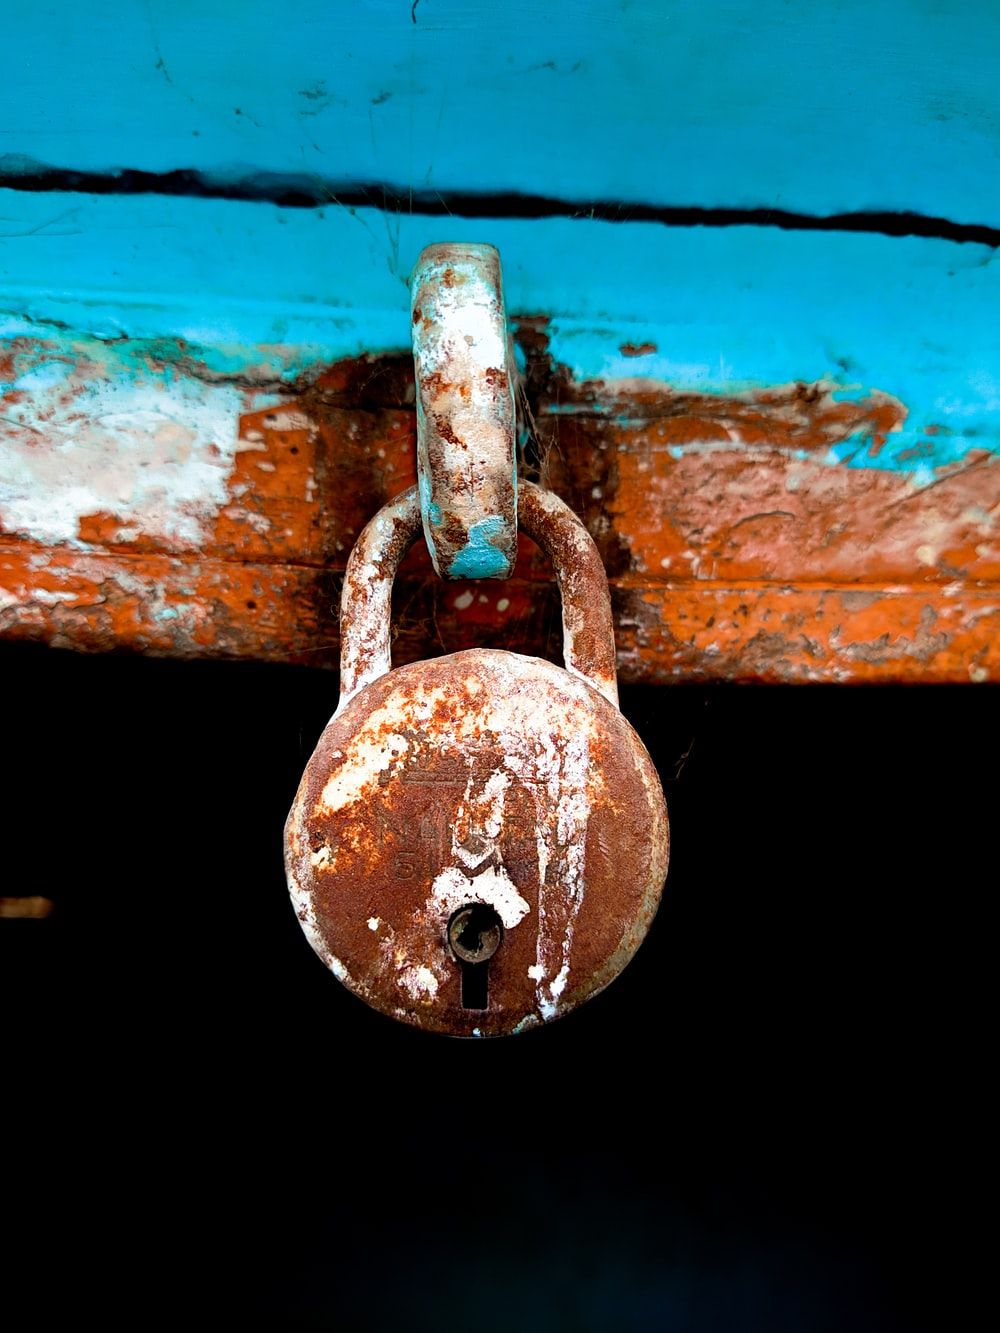 Old Lock Picture. Download Free Image